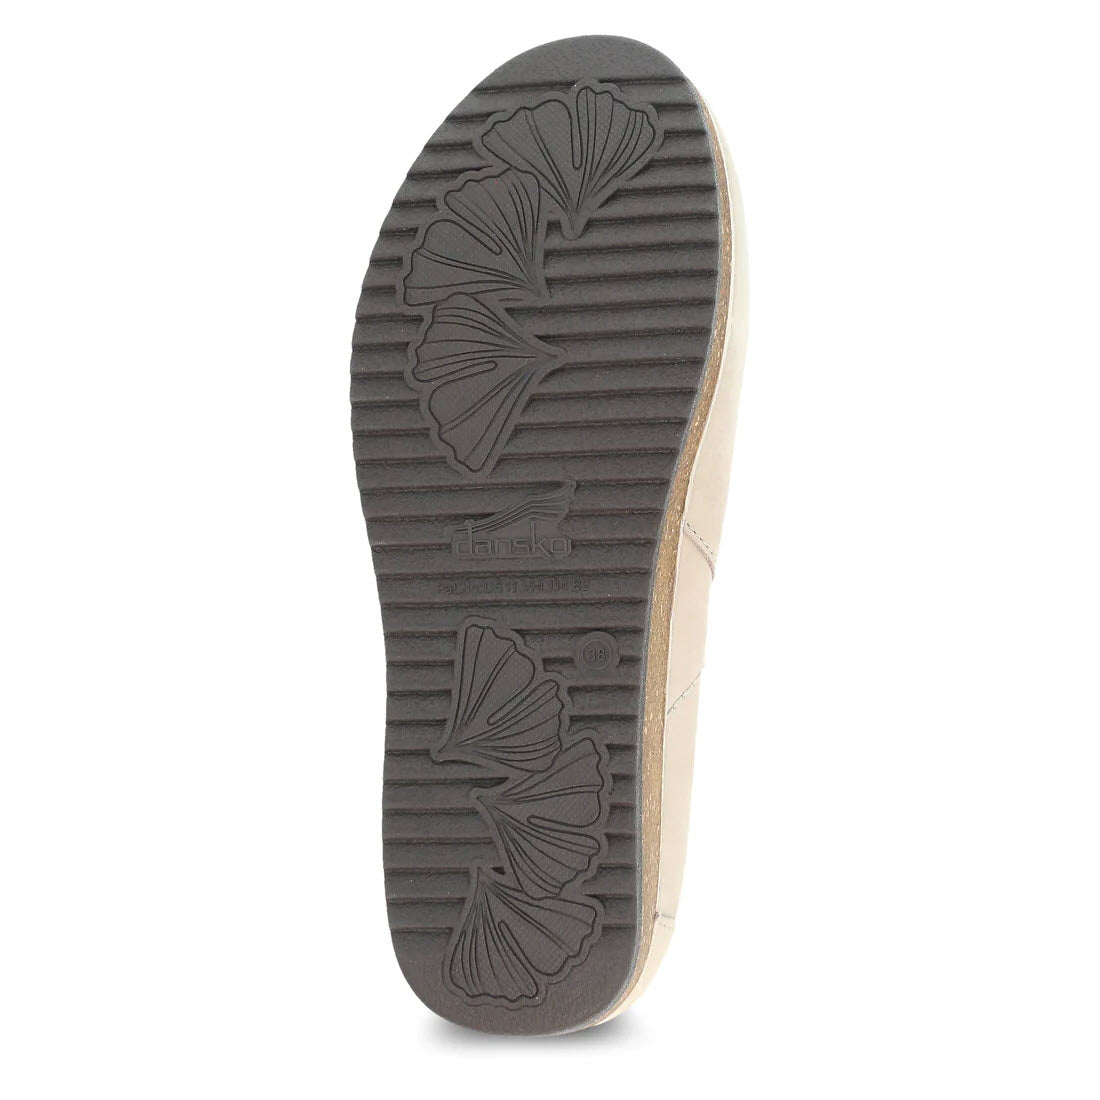 Sole of a tan open back clog displaying a floral pattern and ridged texture for support, with the brand name &quot;Dansko&quot; visible.